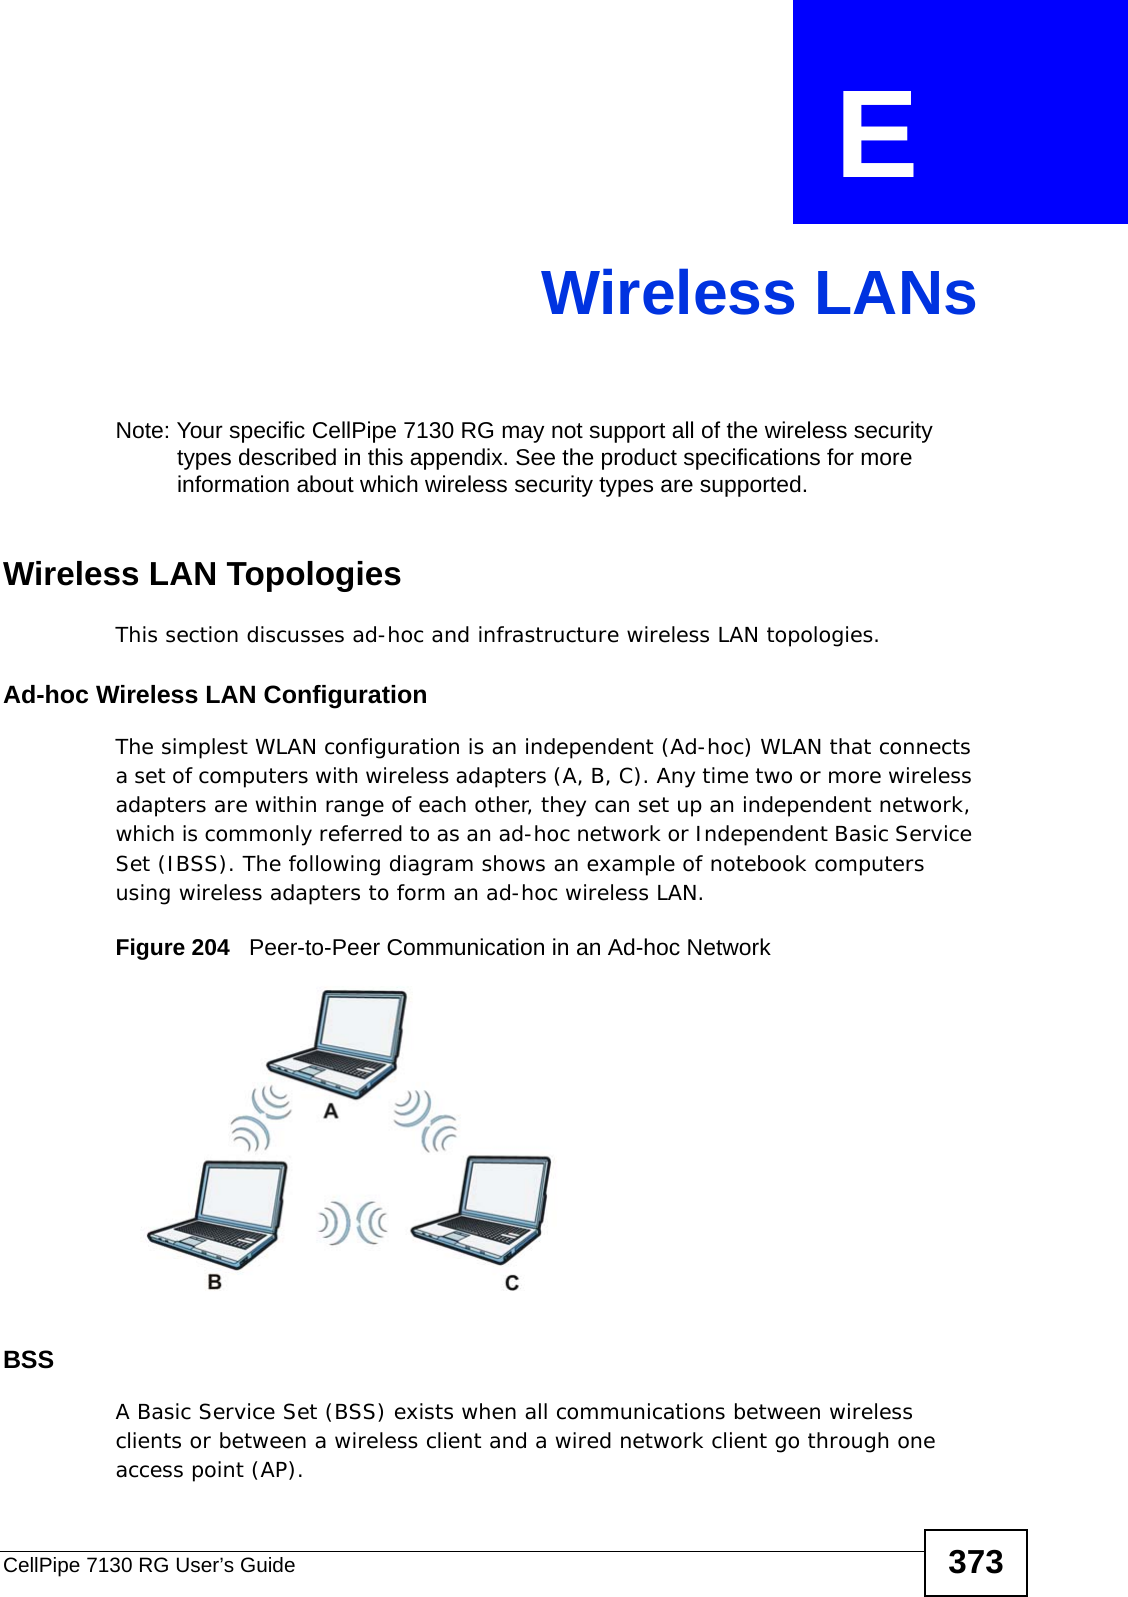 CellPipe 7130 RG User’s Guide 373APPENDIX  E Wireless LANsNote: Your specific CellPipe 7130 RG may not support all of the wireless security types described in this appendix. See the product specifications for more information about which wireless security types are supported.Wireless LAN TopologiesThis section discusses ad-hoc and infrastructure wireless LAN topologies.Ad-hoc Wireless LAN ConfigurationThe simplest WLAN configuration is an independent (Ad-hoc) WLAN that connects a set of computers with wireless adapters (A, B, C). Any time two or more wireless adapters are within range of each other, they can set up an independent network, which is commonly referred to as an ad-hoc network or Independent Basic Service Set (IBSS). The following diagram shows an example of notebook computers using wireless adapters to form an ad-hoc wireless LAN. Figure 204   Peer-to-Peer Communication in an Ad-hoc NetworkBSSA Basic Service Set (BSS) exists when all communications between wireless clients or between a wireless client and a wired network client go through one access point (AP). 